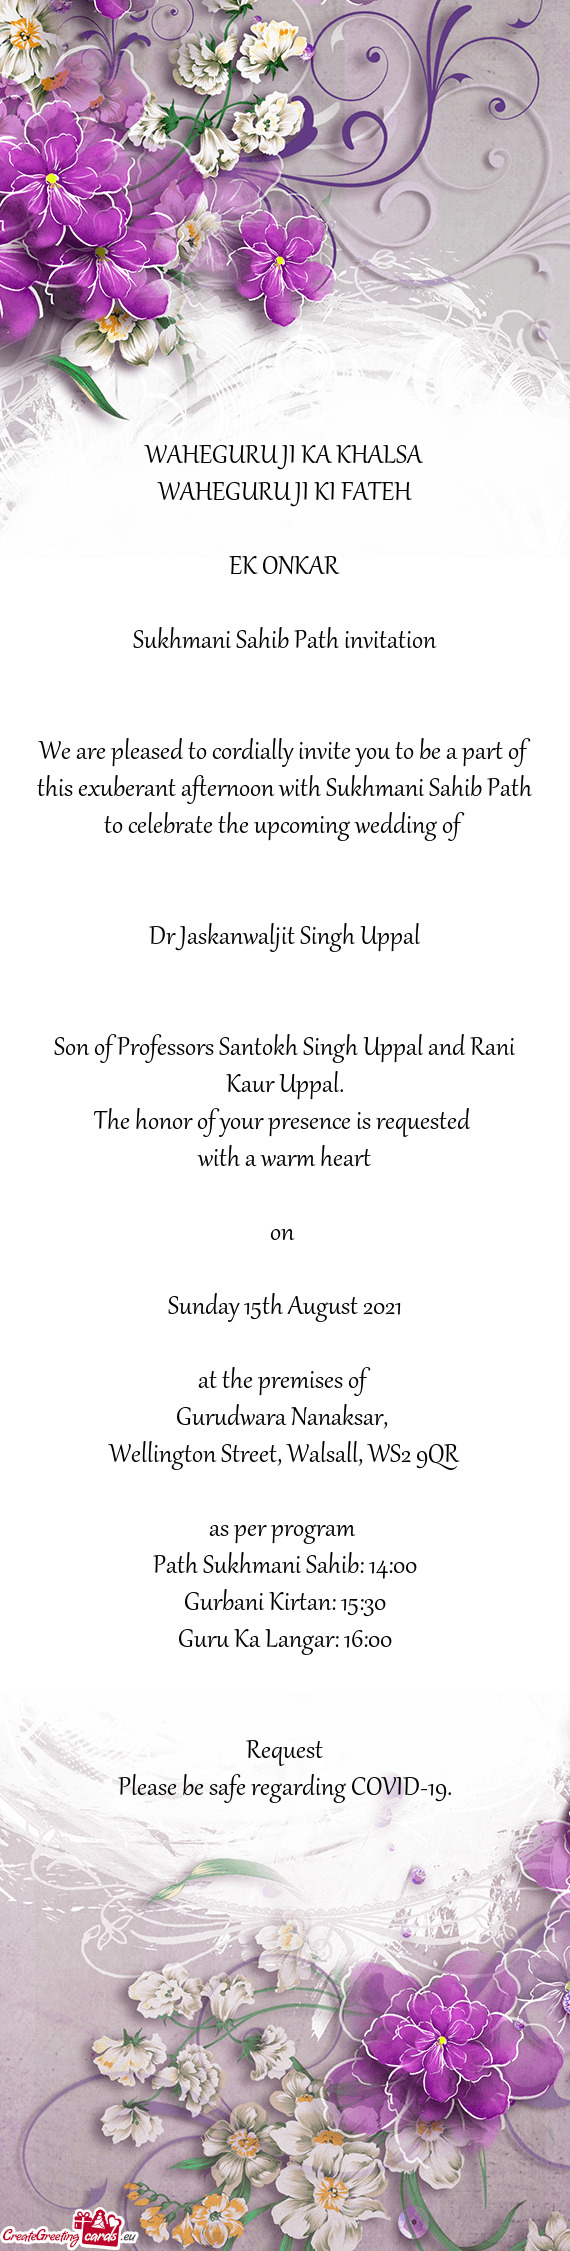 We are pleased to cordially invite you to be a part of this exuberant afternoon with Sukhmani Sahib